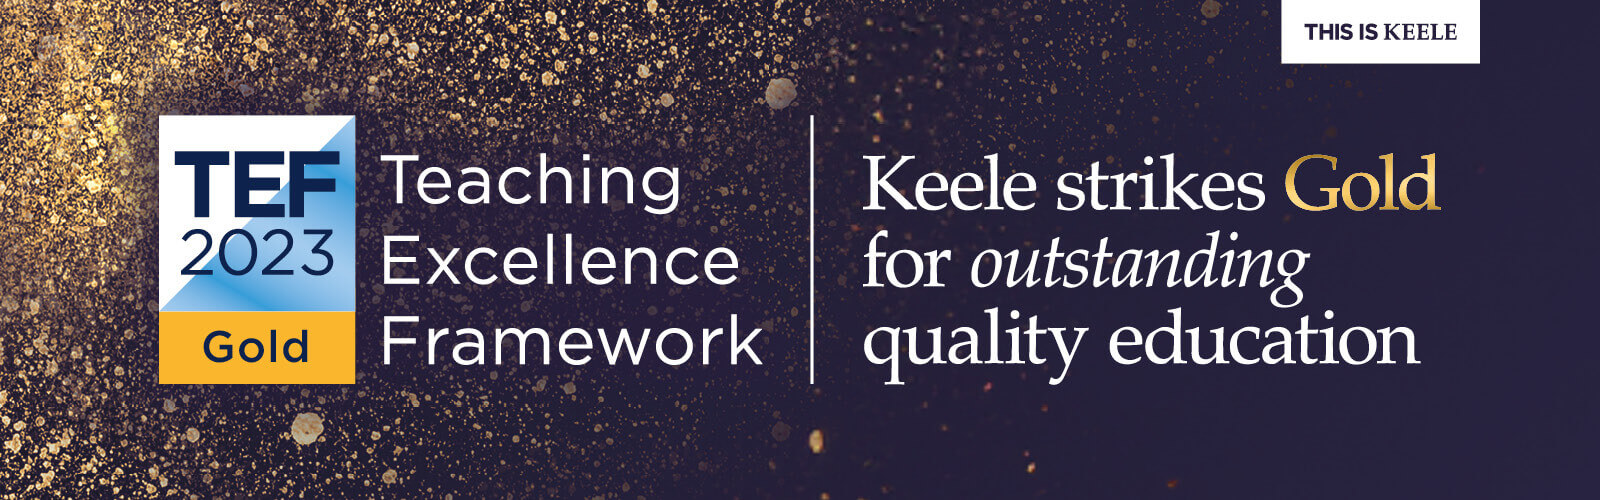 Keele strikes Gold in national assessment of education